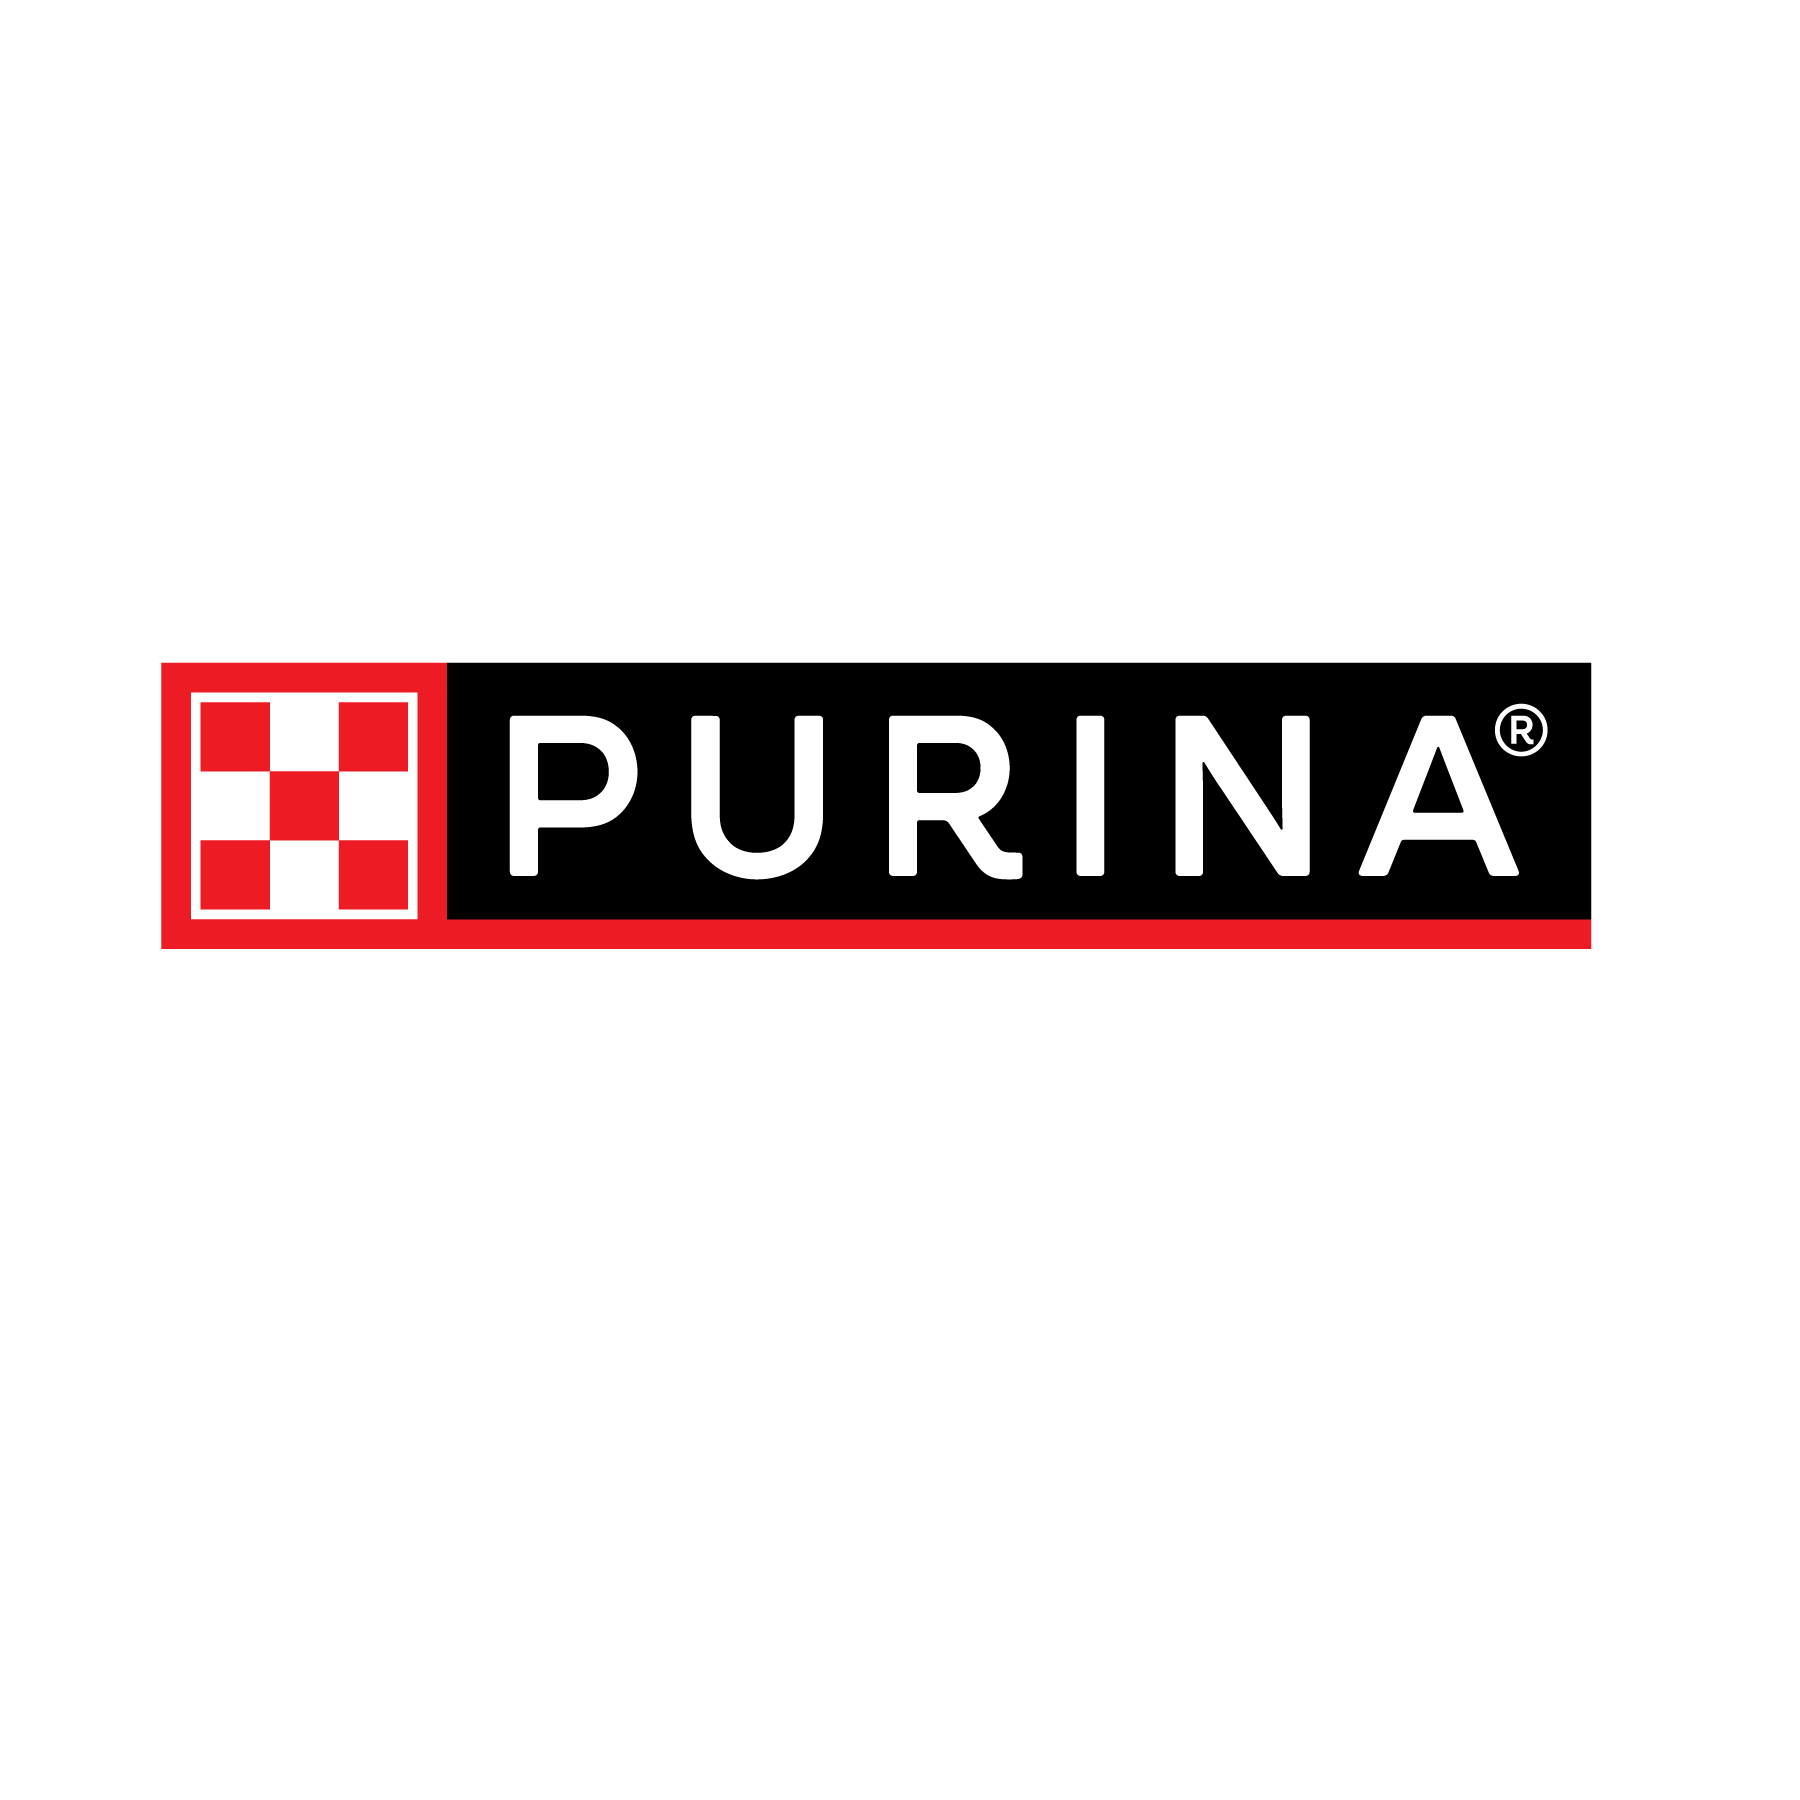 Your Pet, Our Passion